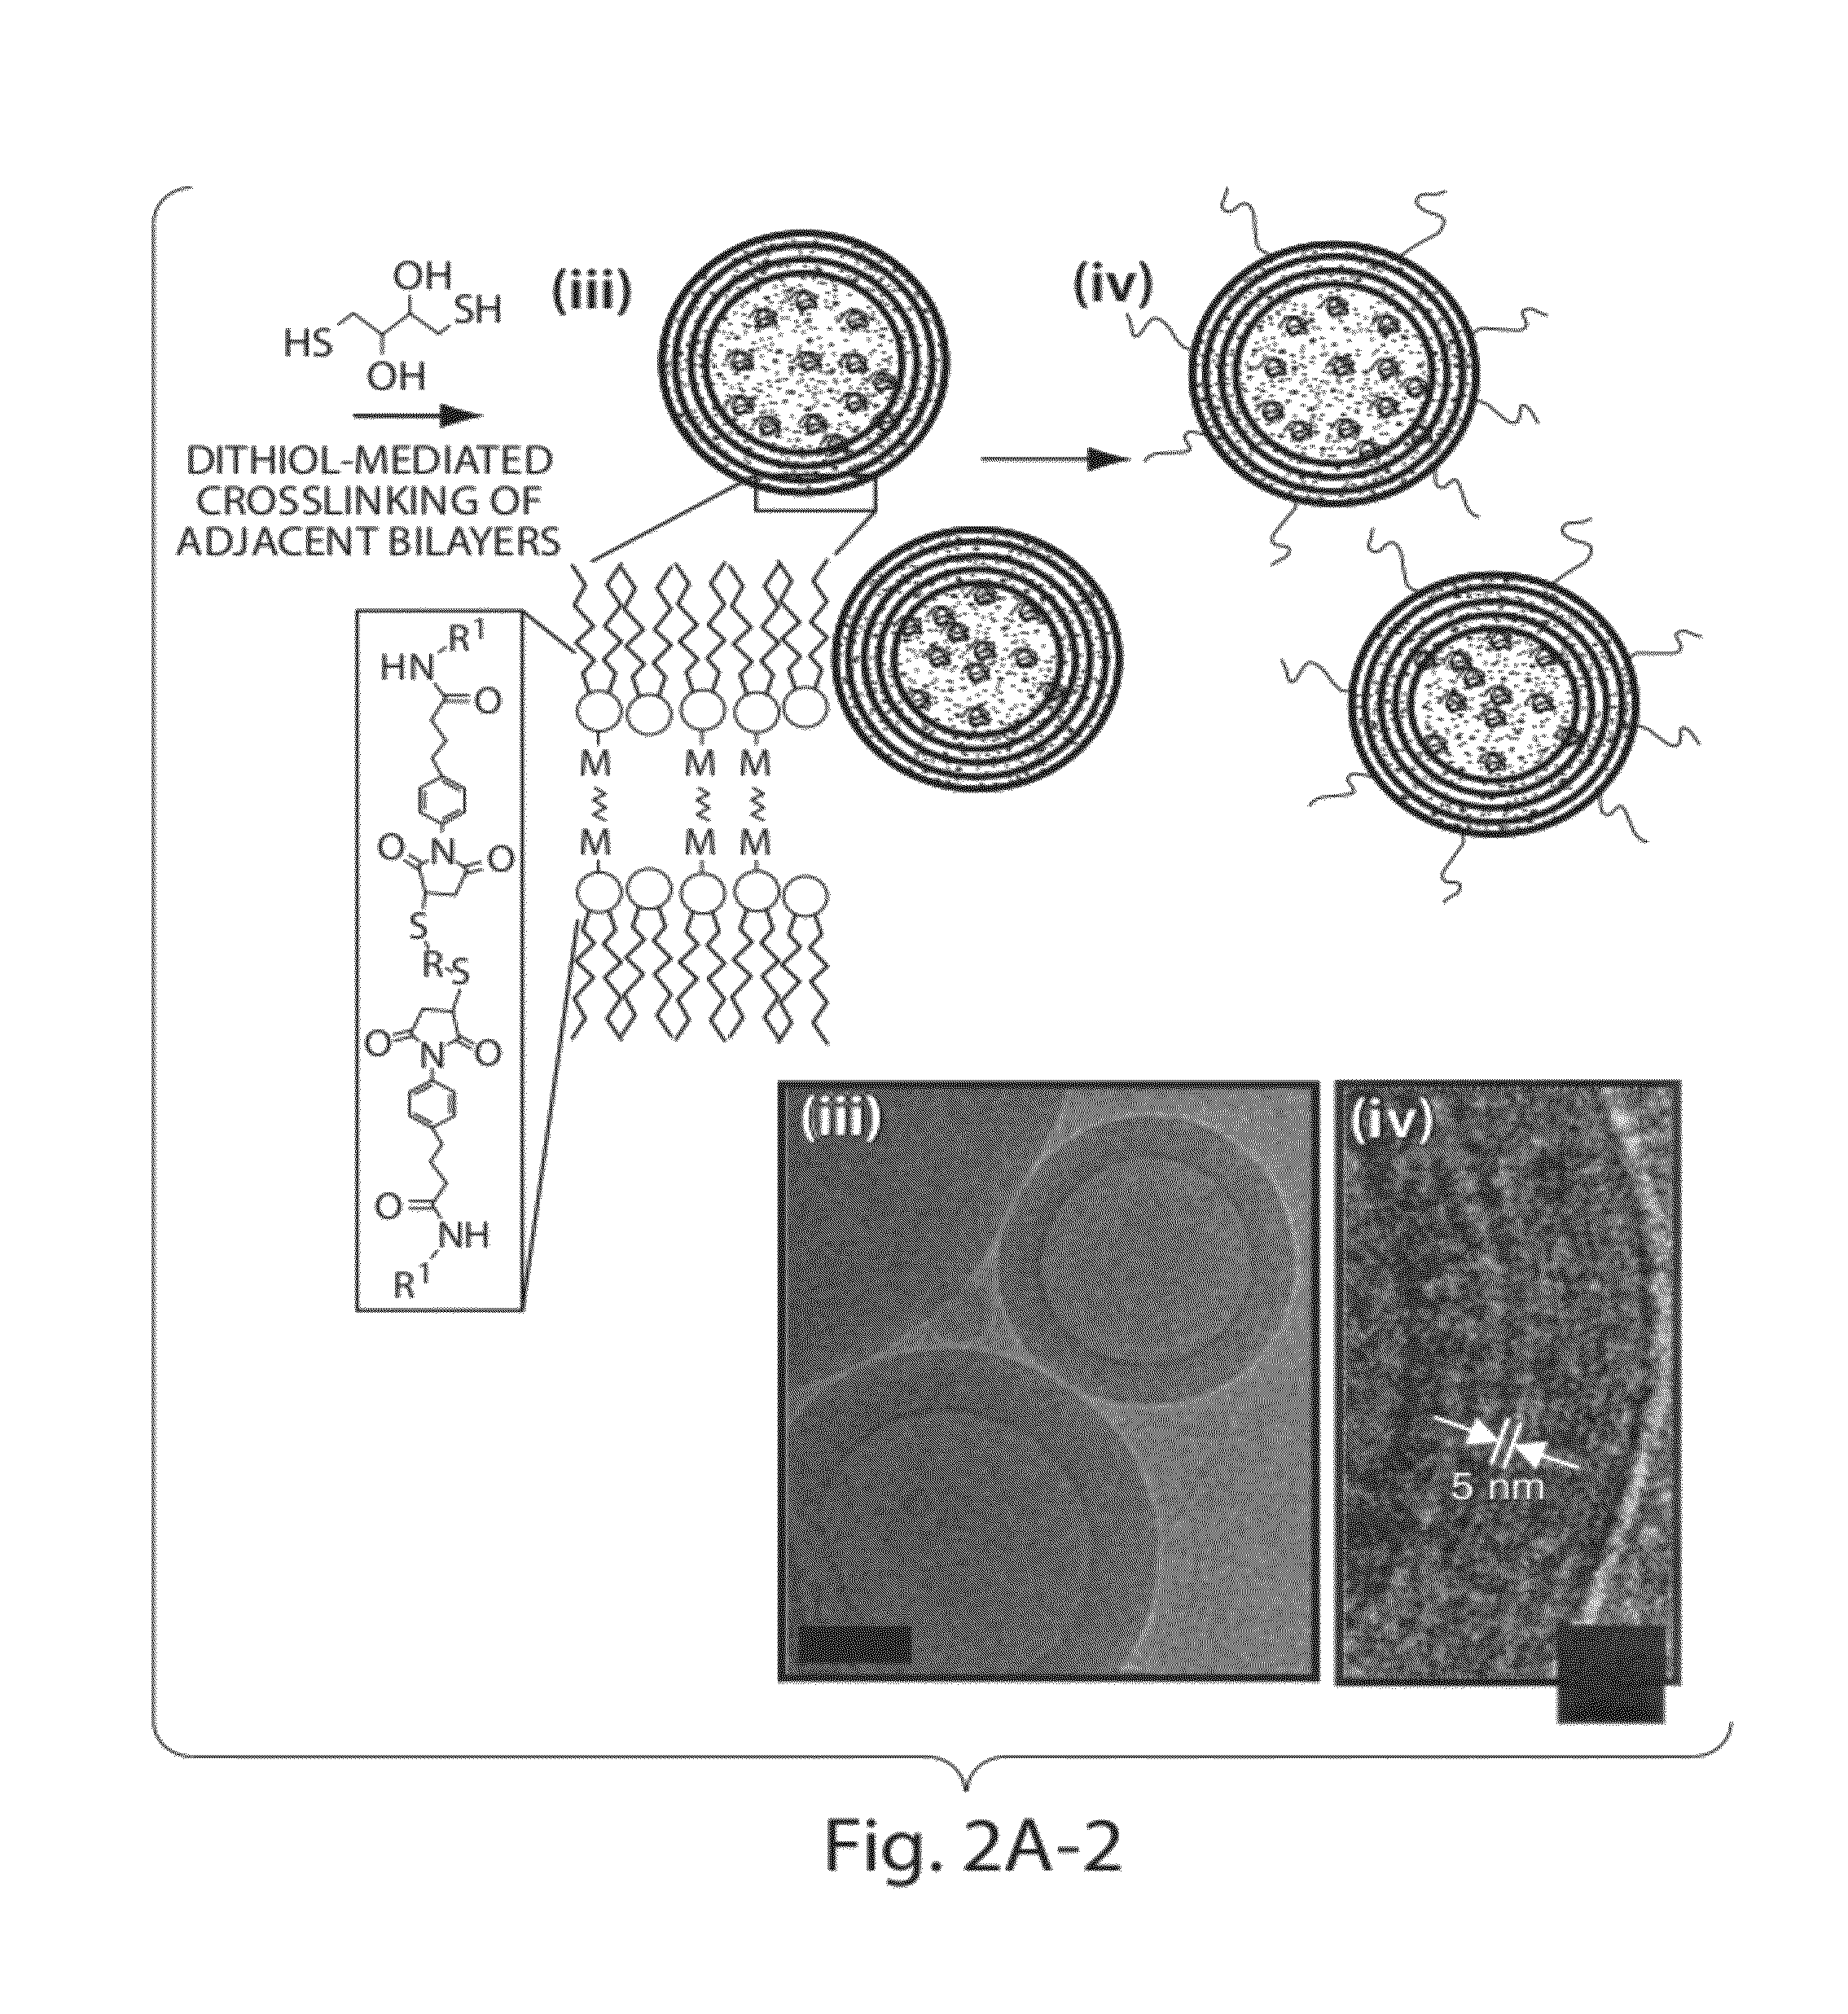 Lipid vesicle compositions and methods of use